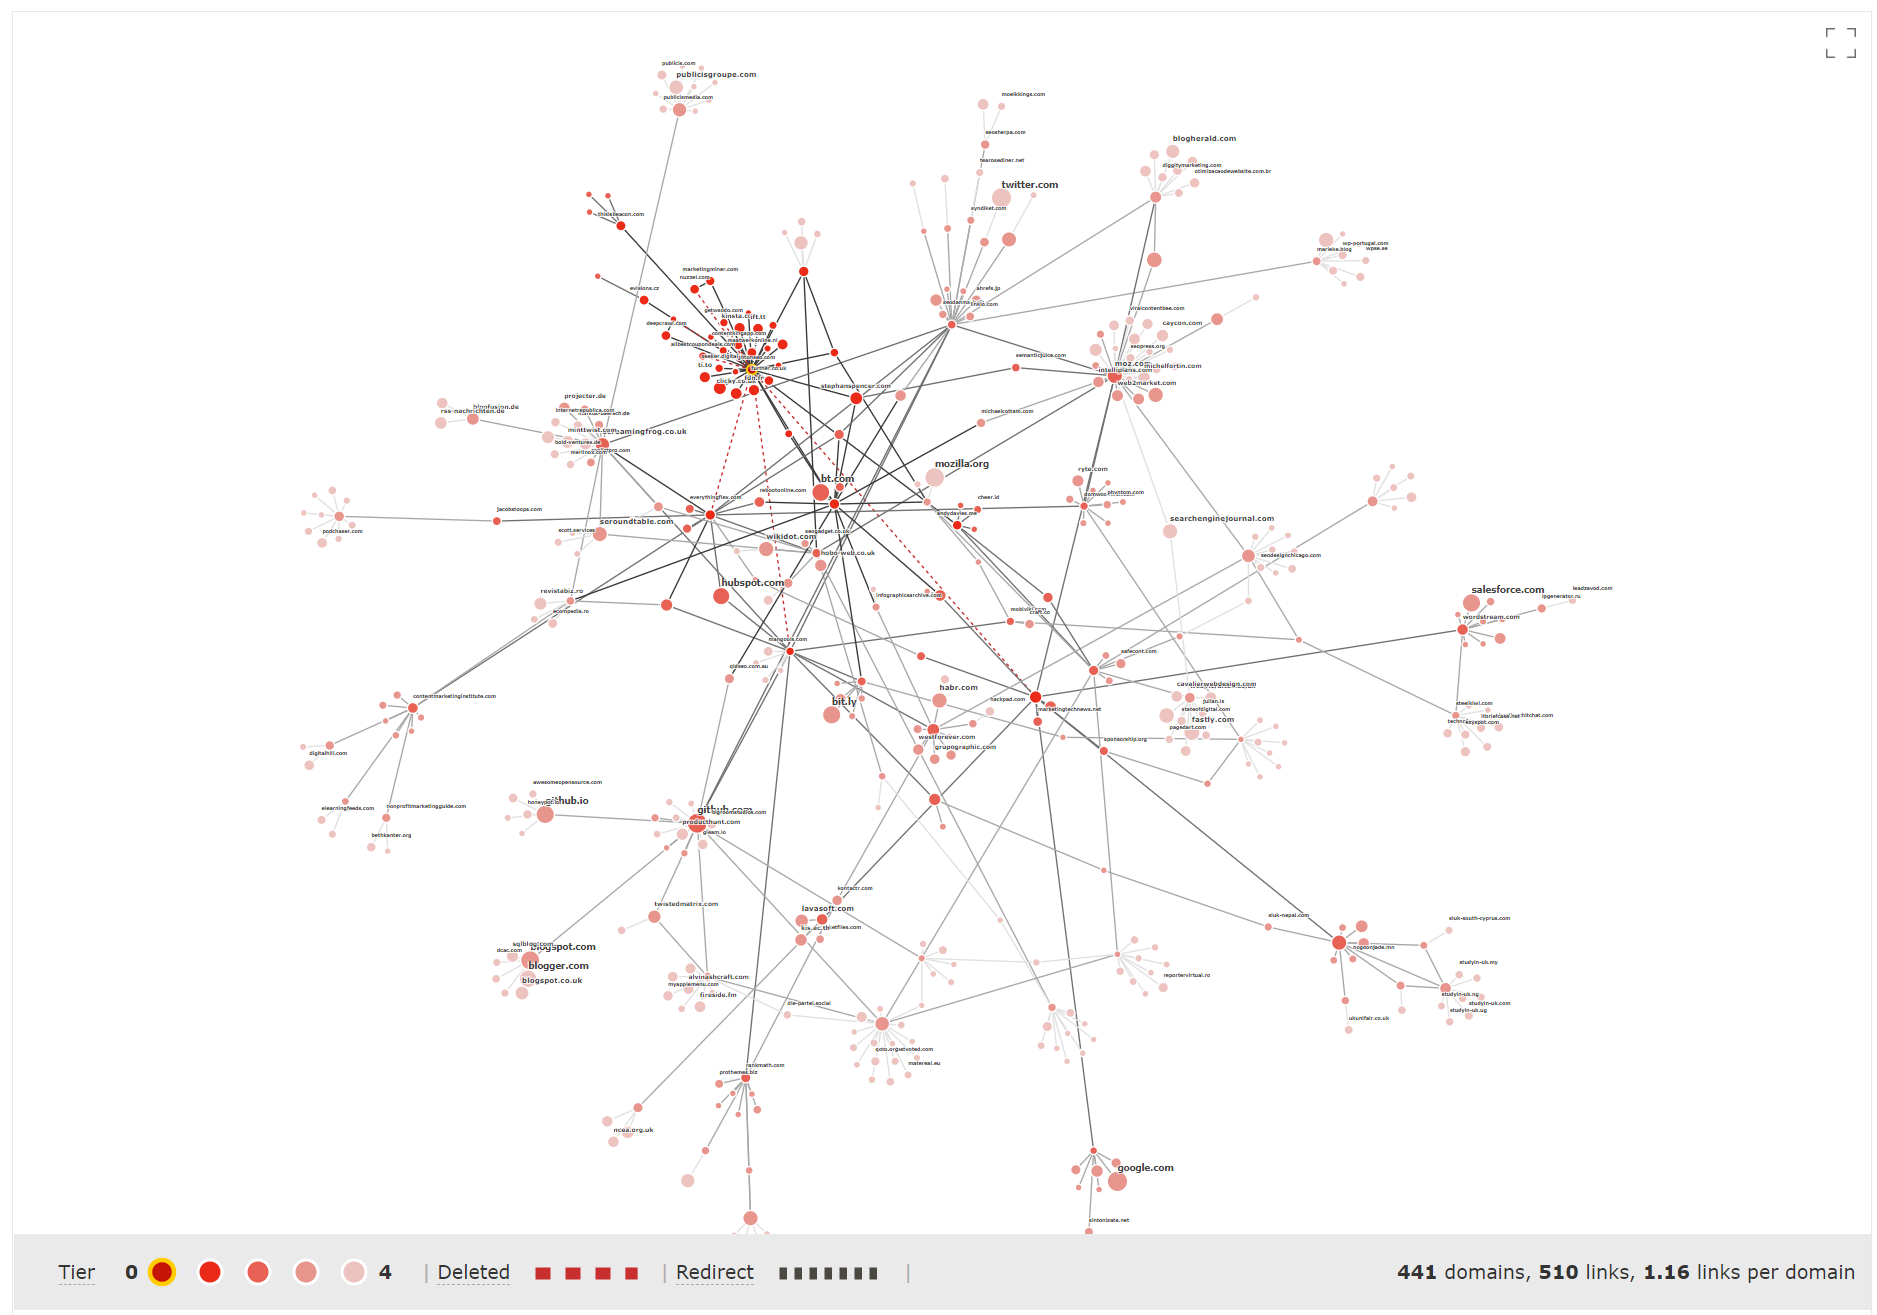 A noisy Link Graph with all Tiers shown.  The lines are criss-crossing over each other. 
